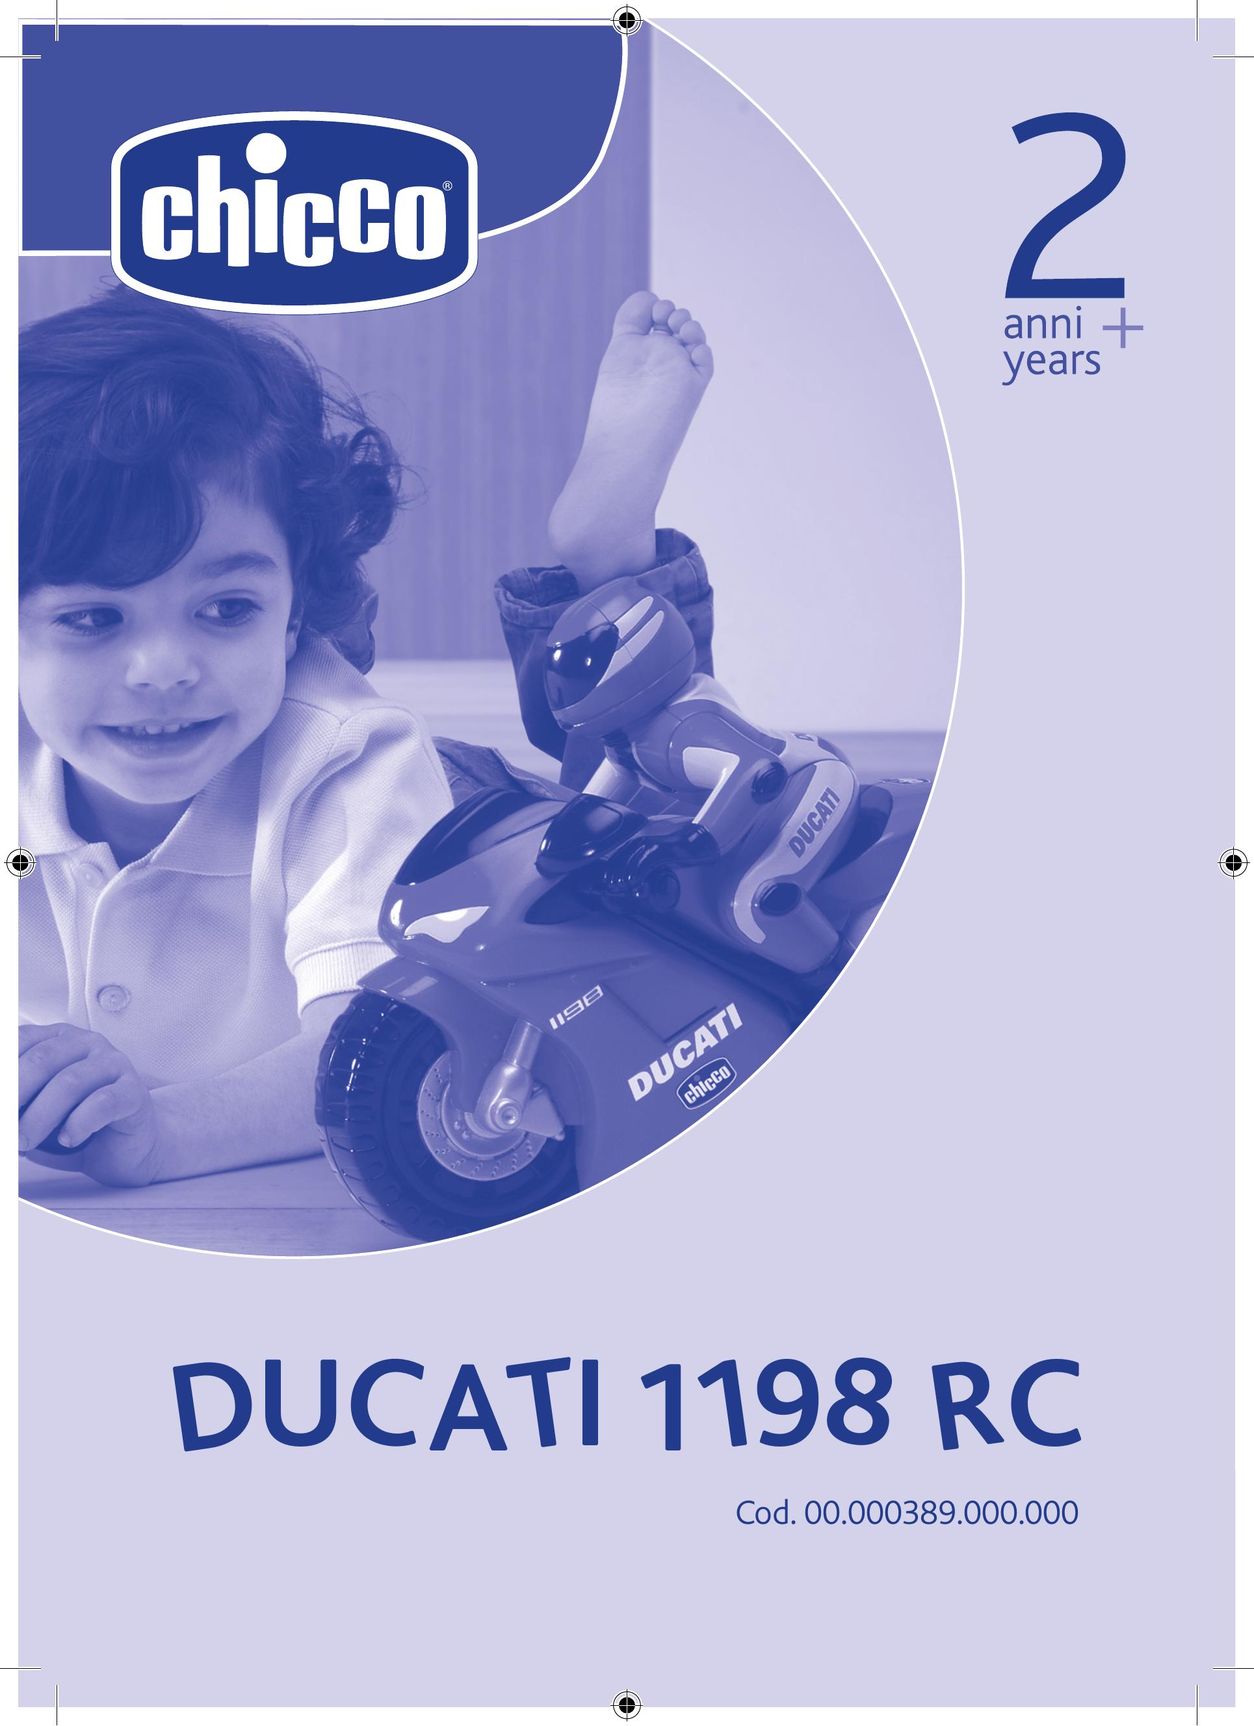 Chicco DUCATI 1198 RC Baby Toy User Manual